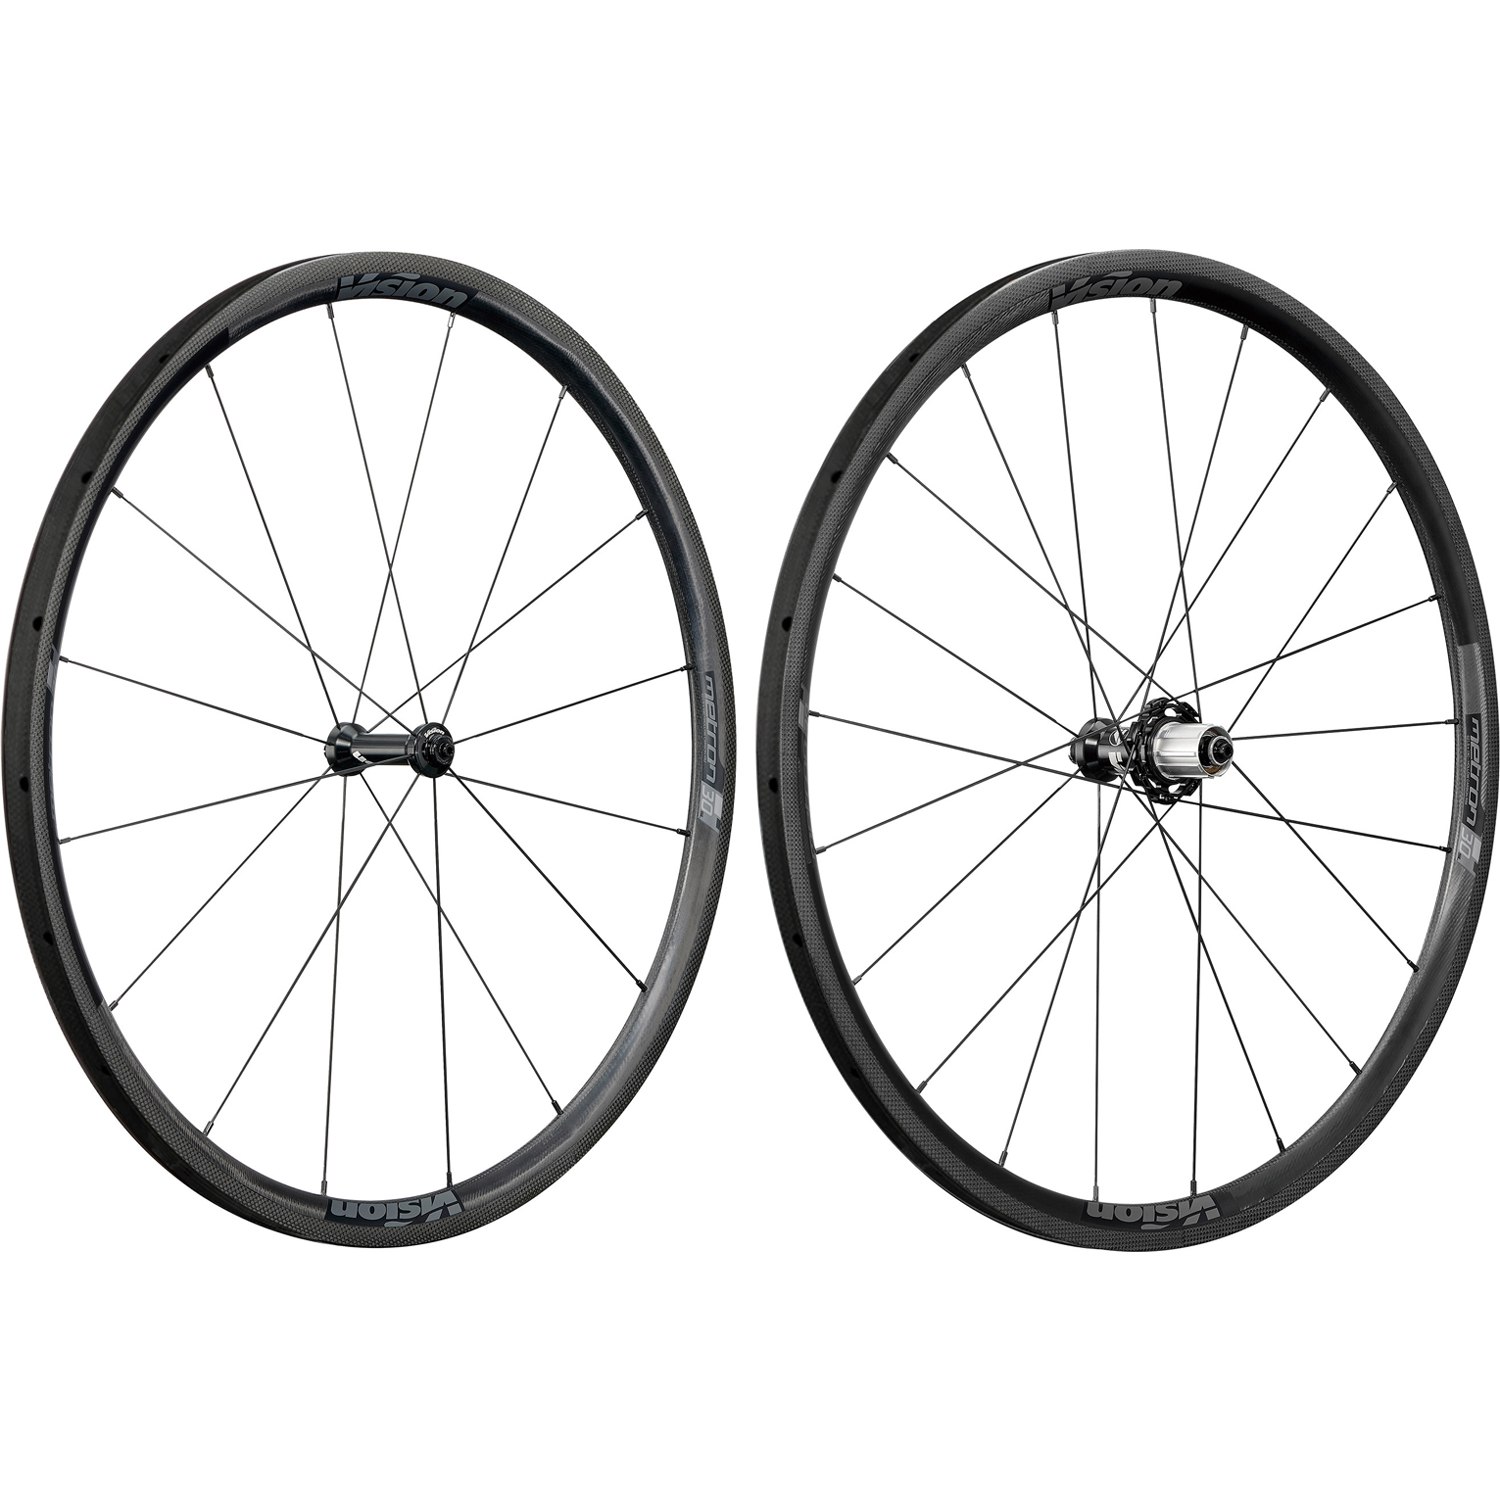 Picture of Vision Metron 30 SL Carbon Wheelset - Tubular Tires - SRAM XDR